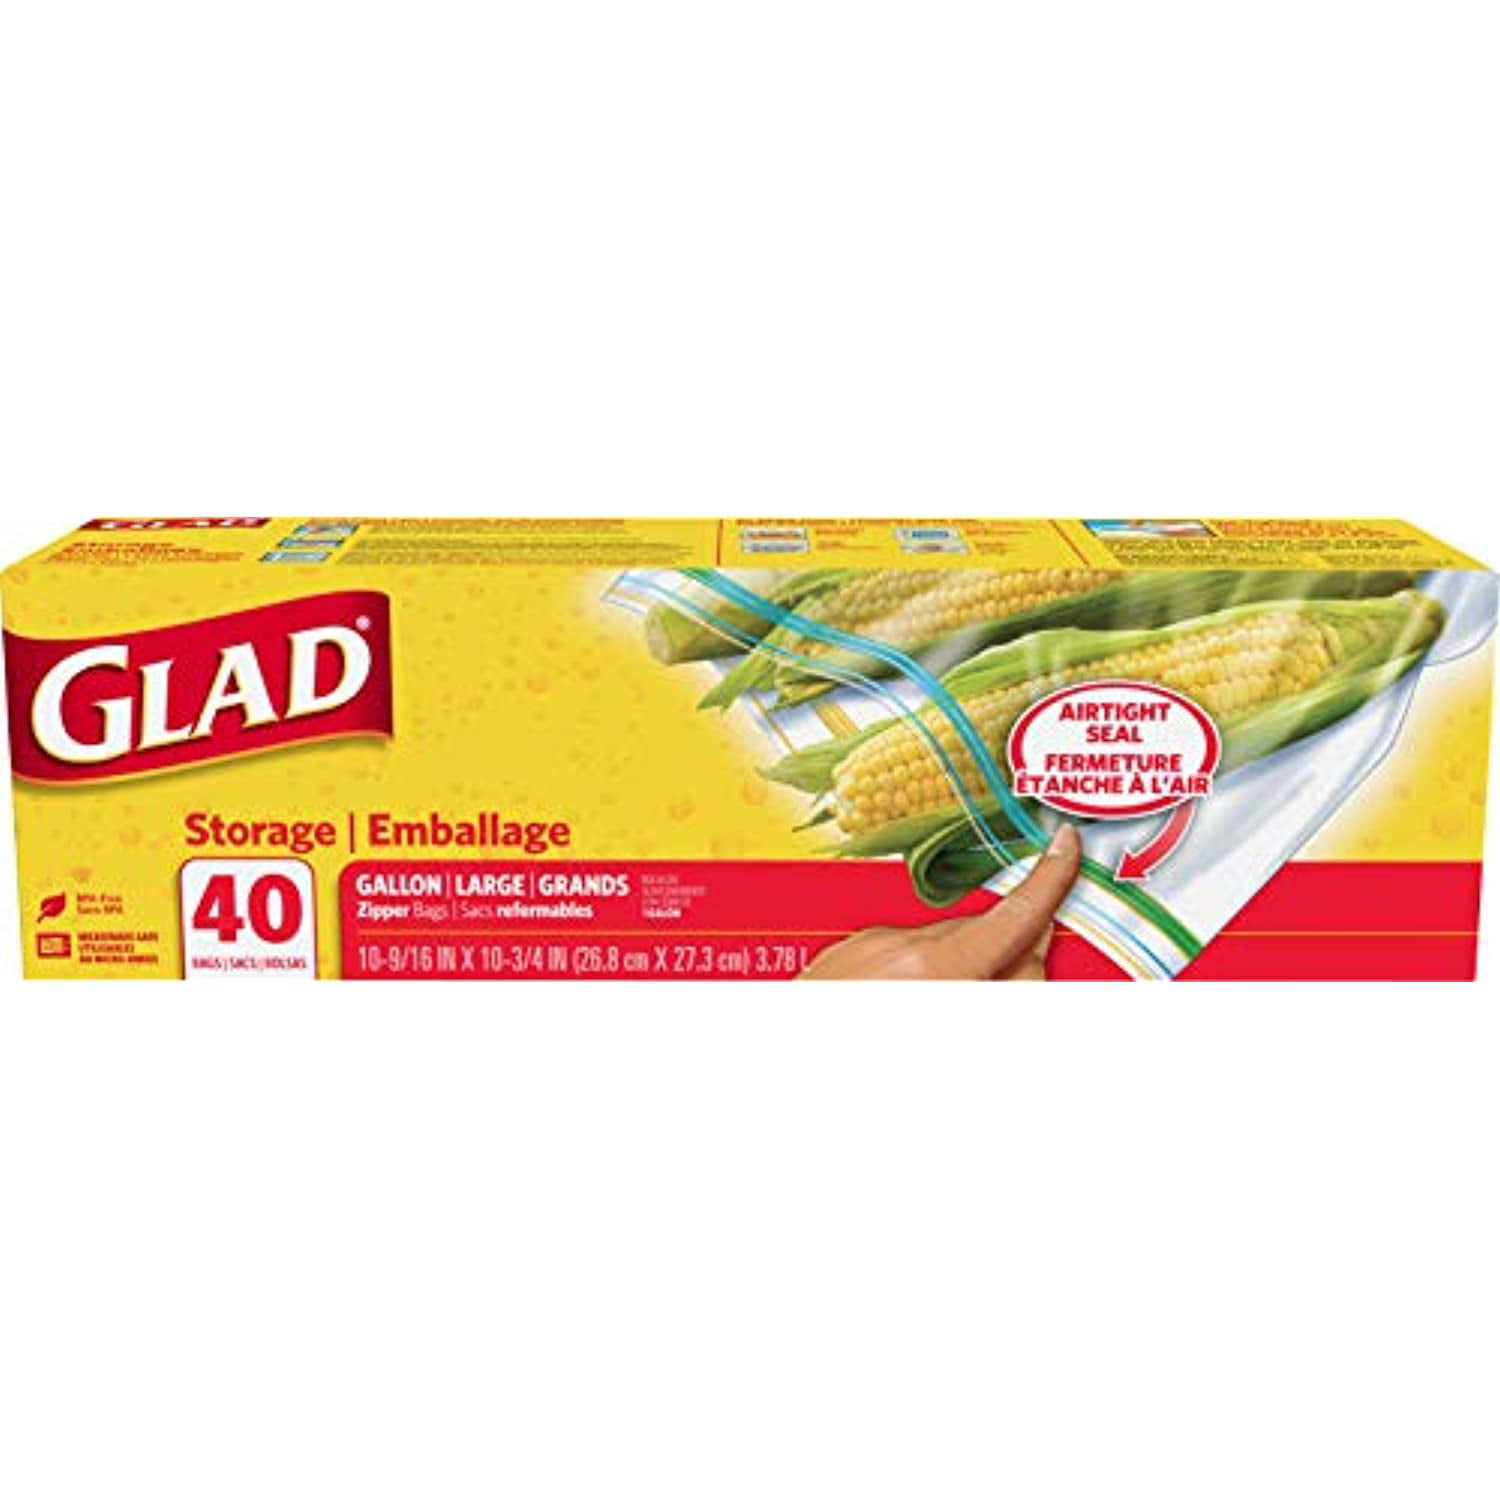 Glad Zipper Food Storage Snack Bags 50 Count Pack of 12 